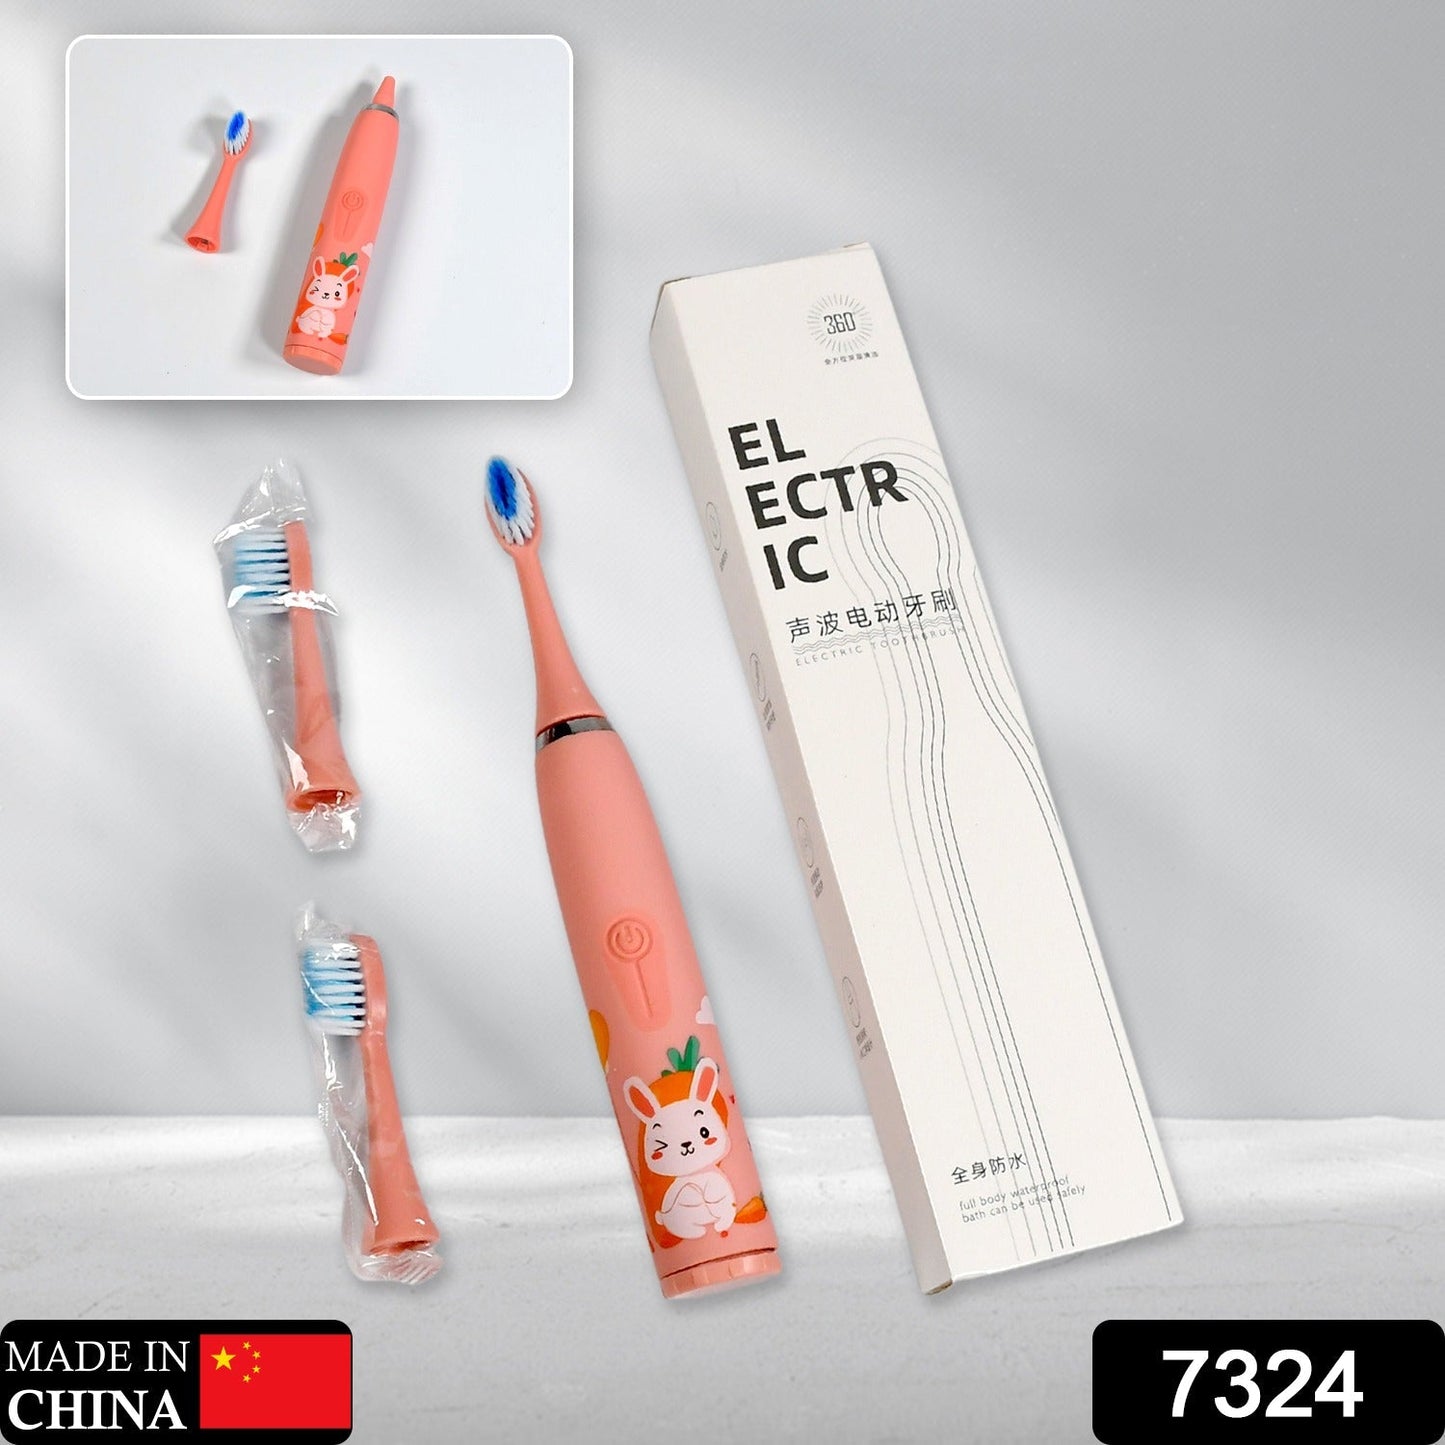 7324 ELECTRIC TOOTHBRUSH FOR ADULTS AND TEENS, ELECTRIC TOOTHBRUSH BATTERY OPERATED DEEP CLEANSING TOOTHBRUSH